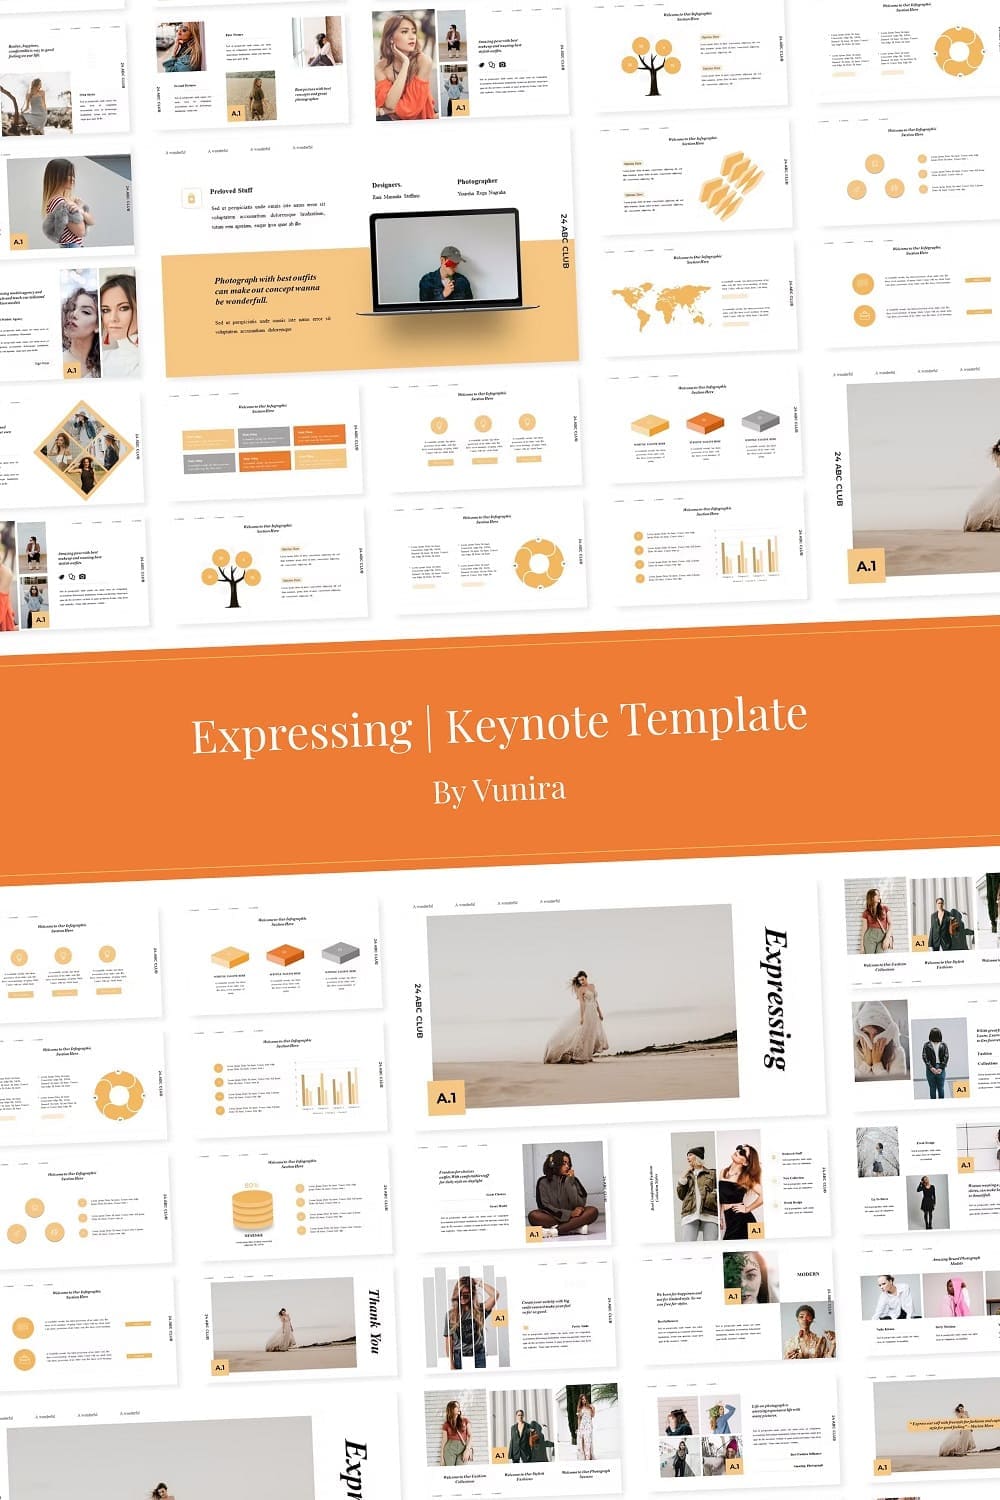 Infographic of Expressing | Keynote Template.